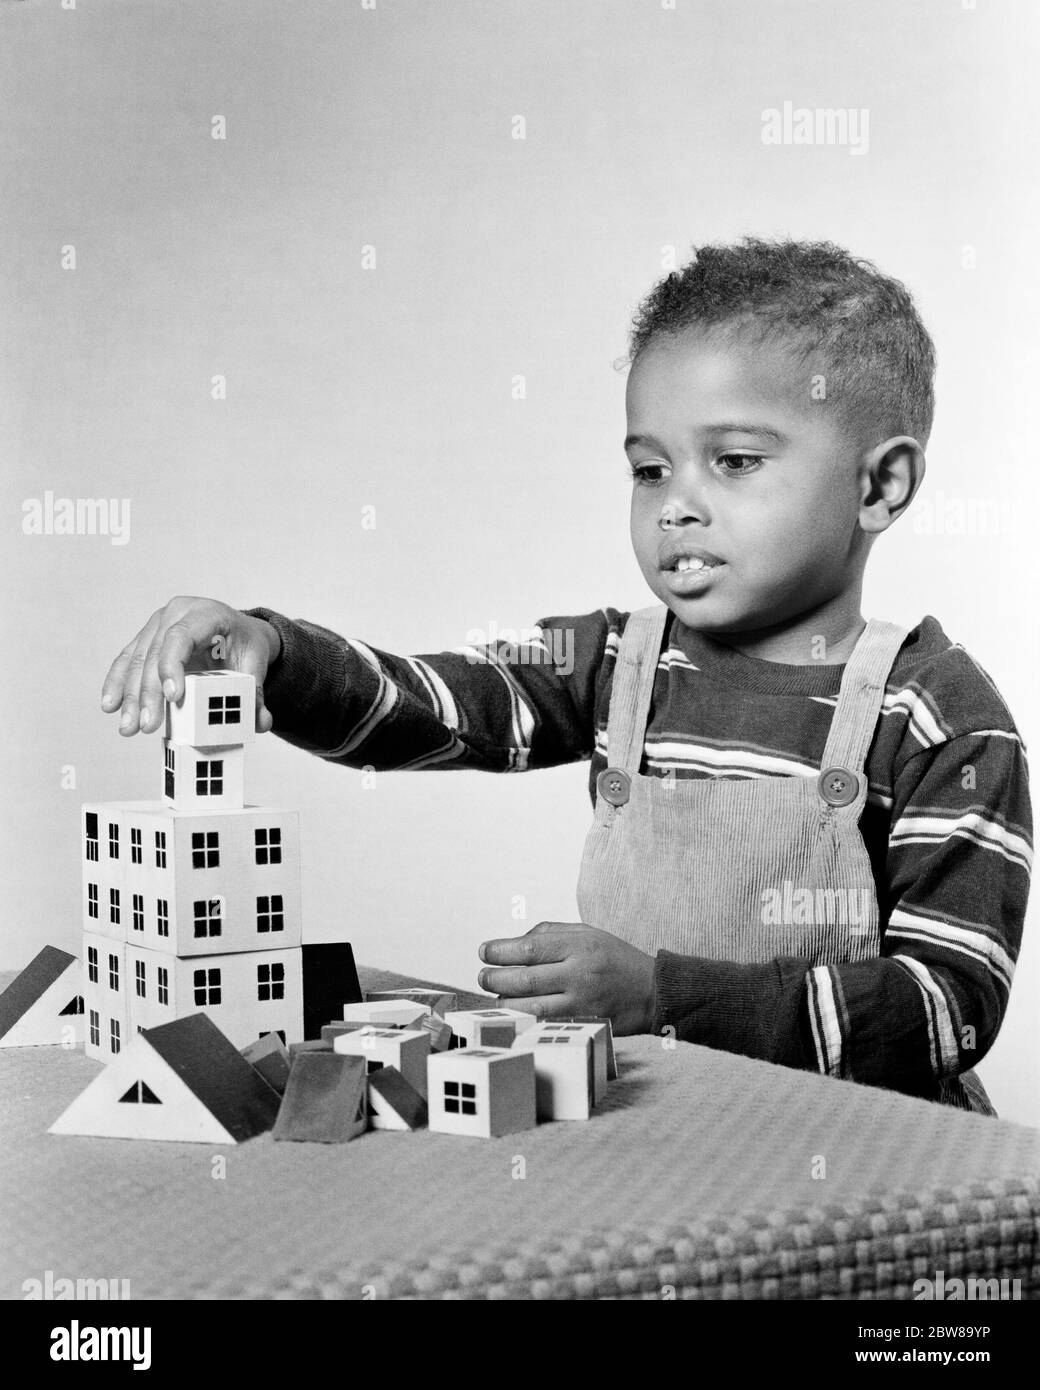 1950s ENGROSSED AFRICAN-AMERICAN BOY PLAYING BUILDING CONSTRUCTING APARTMENT HOUSE STRUCTURE WITH TOY ARCHITECTURAL BLOCKS - n633 HAR001 HARS COPY SPACE HALF-LENGTH MALES ARCHITECT CONFIDENCE EXPRESSIONS BUILDER B&W STRUCTURE ARCHITECTURAL DISCOVERY AFRICAN-AMERICANS AFRICAN-AMERICAN CHOICE THINK BLACK ETHNICITY OCCUPATIONS CONNECTION CONCEPTUAL IMAGINATION BIB OVERALLS T-SHIRT CREATIVITY FOCUSED GROWTH JUVENILES SOLUTIONS ATTENTIVE BLACK AND WHITE CONCENTRATING HAR001 OLD FASHIONED AFRICAN AMERICANS Stock Photo